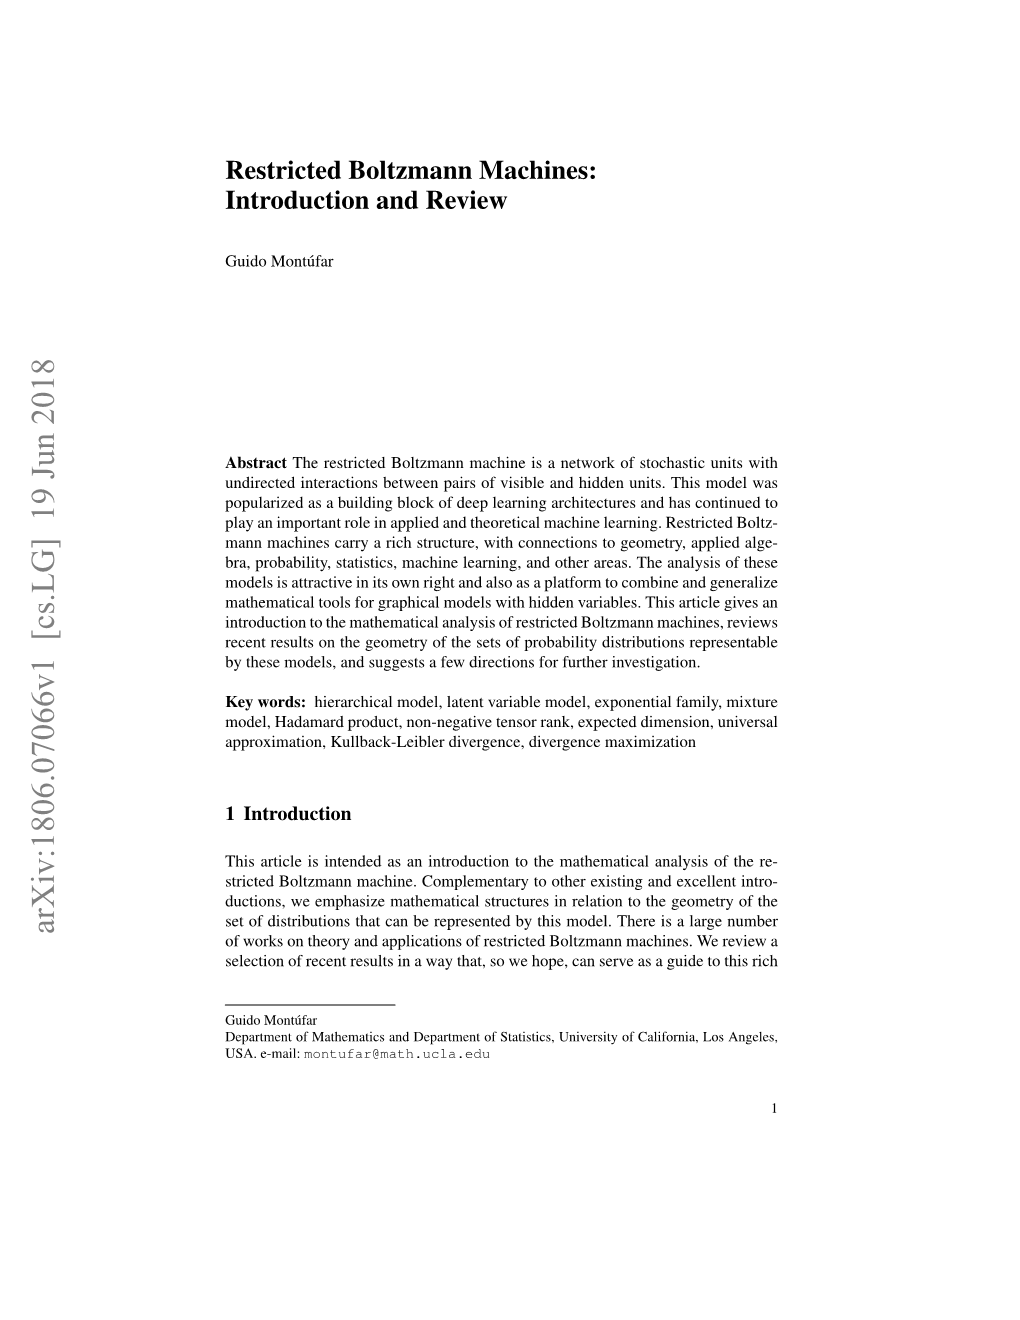 Restricted Boltzmann Machines: Introduction and Review